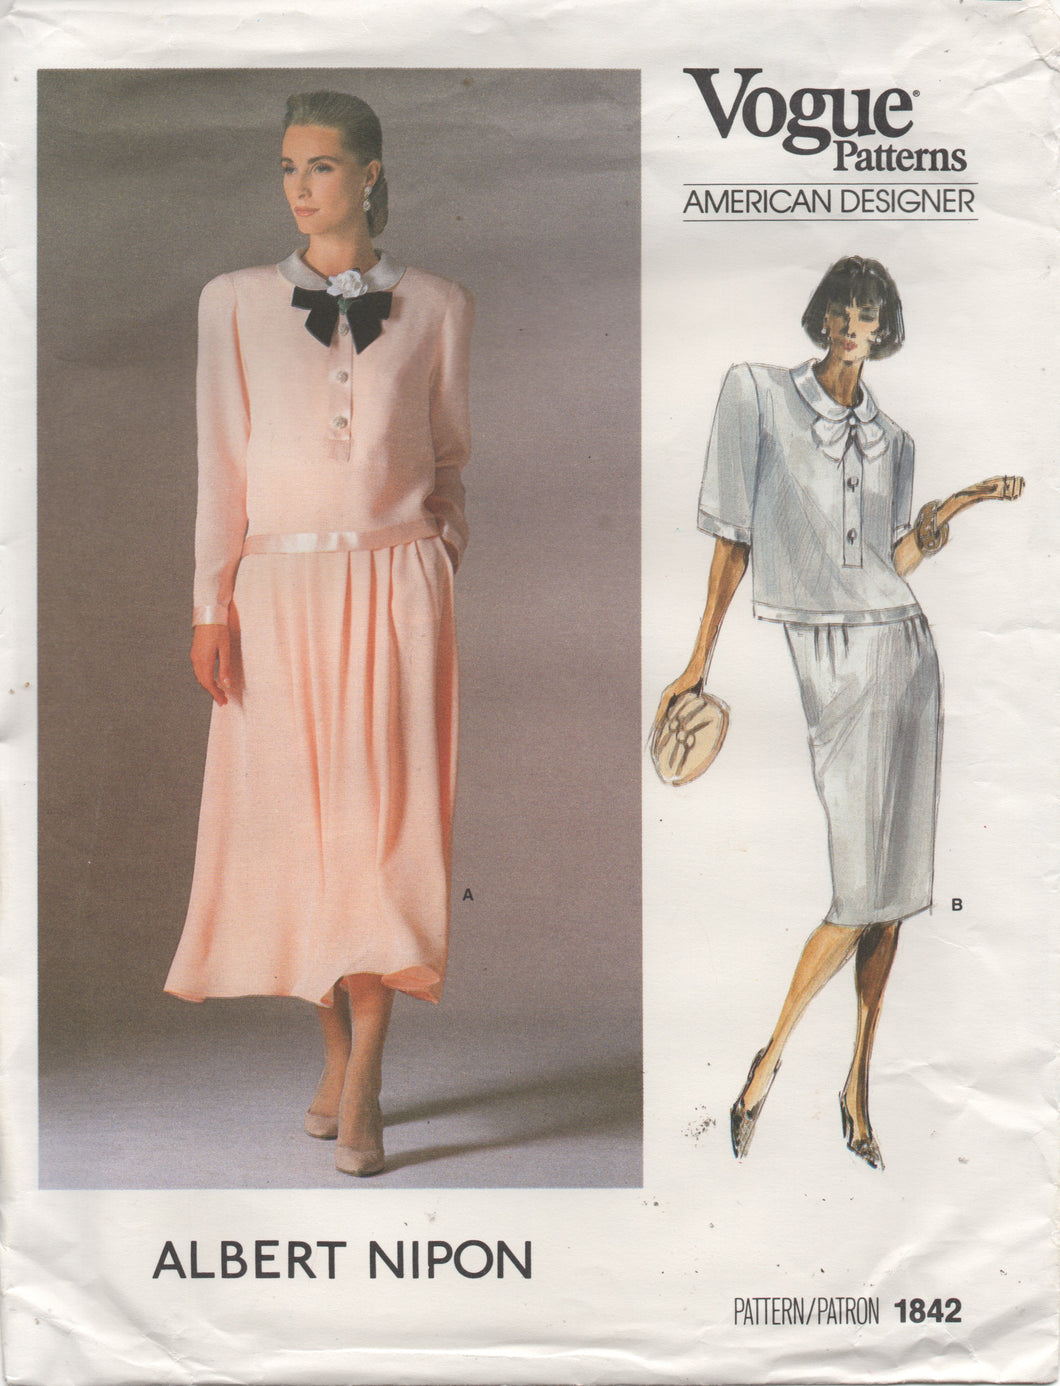 1980's Vogue American Designer Half Button Blouse with Peter Pan Collar and Soft Pleated Skirt - Albert Nipon - Bust 34